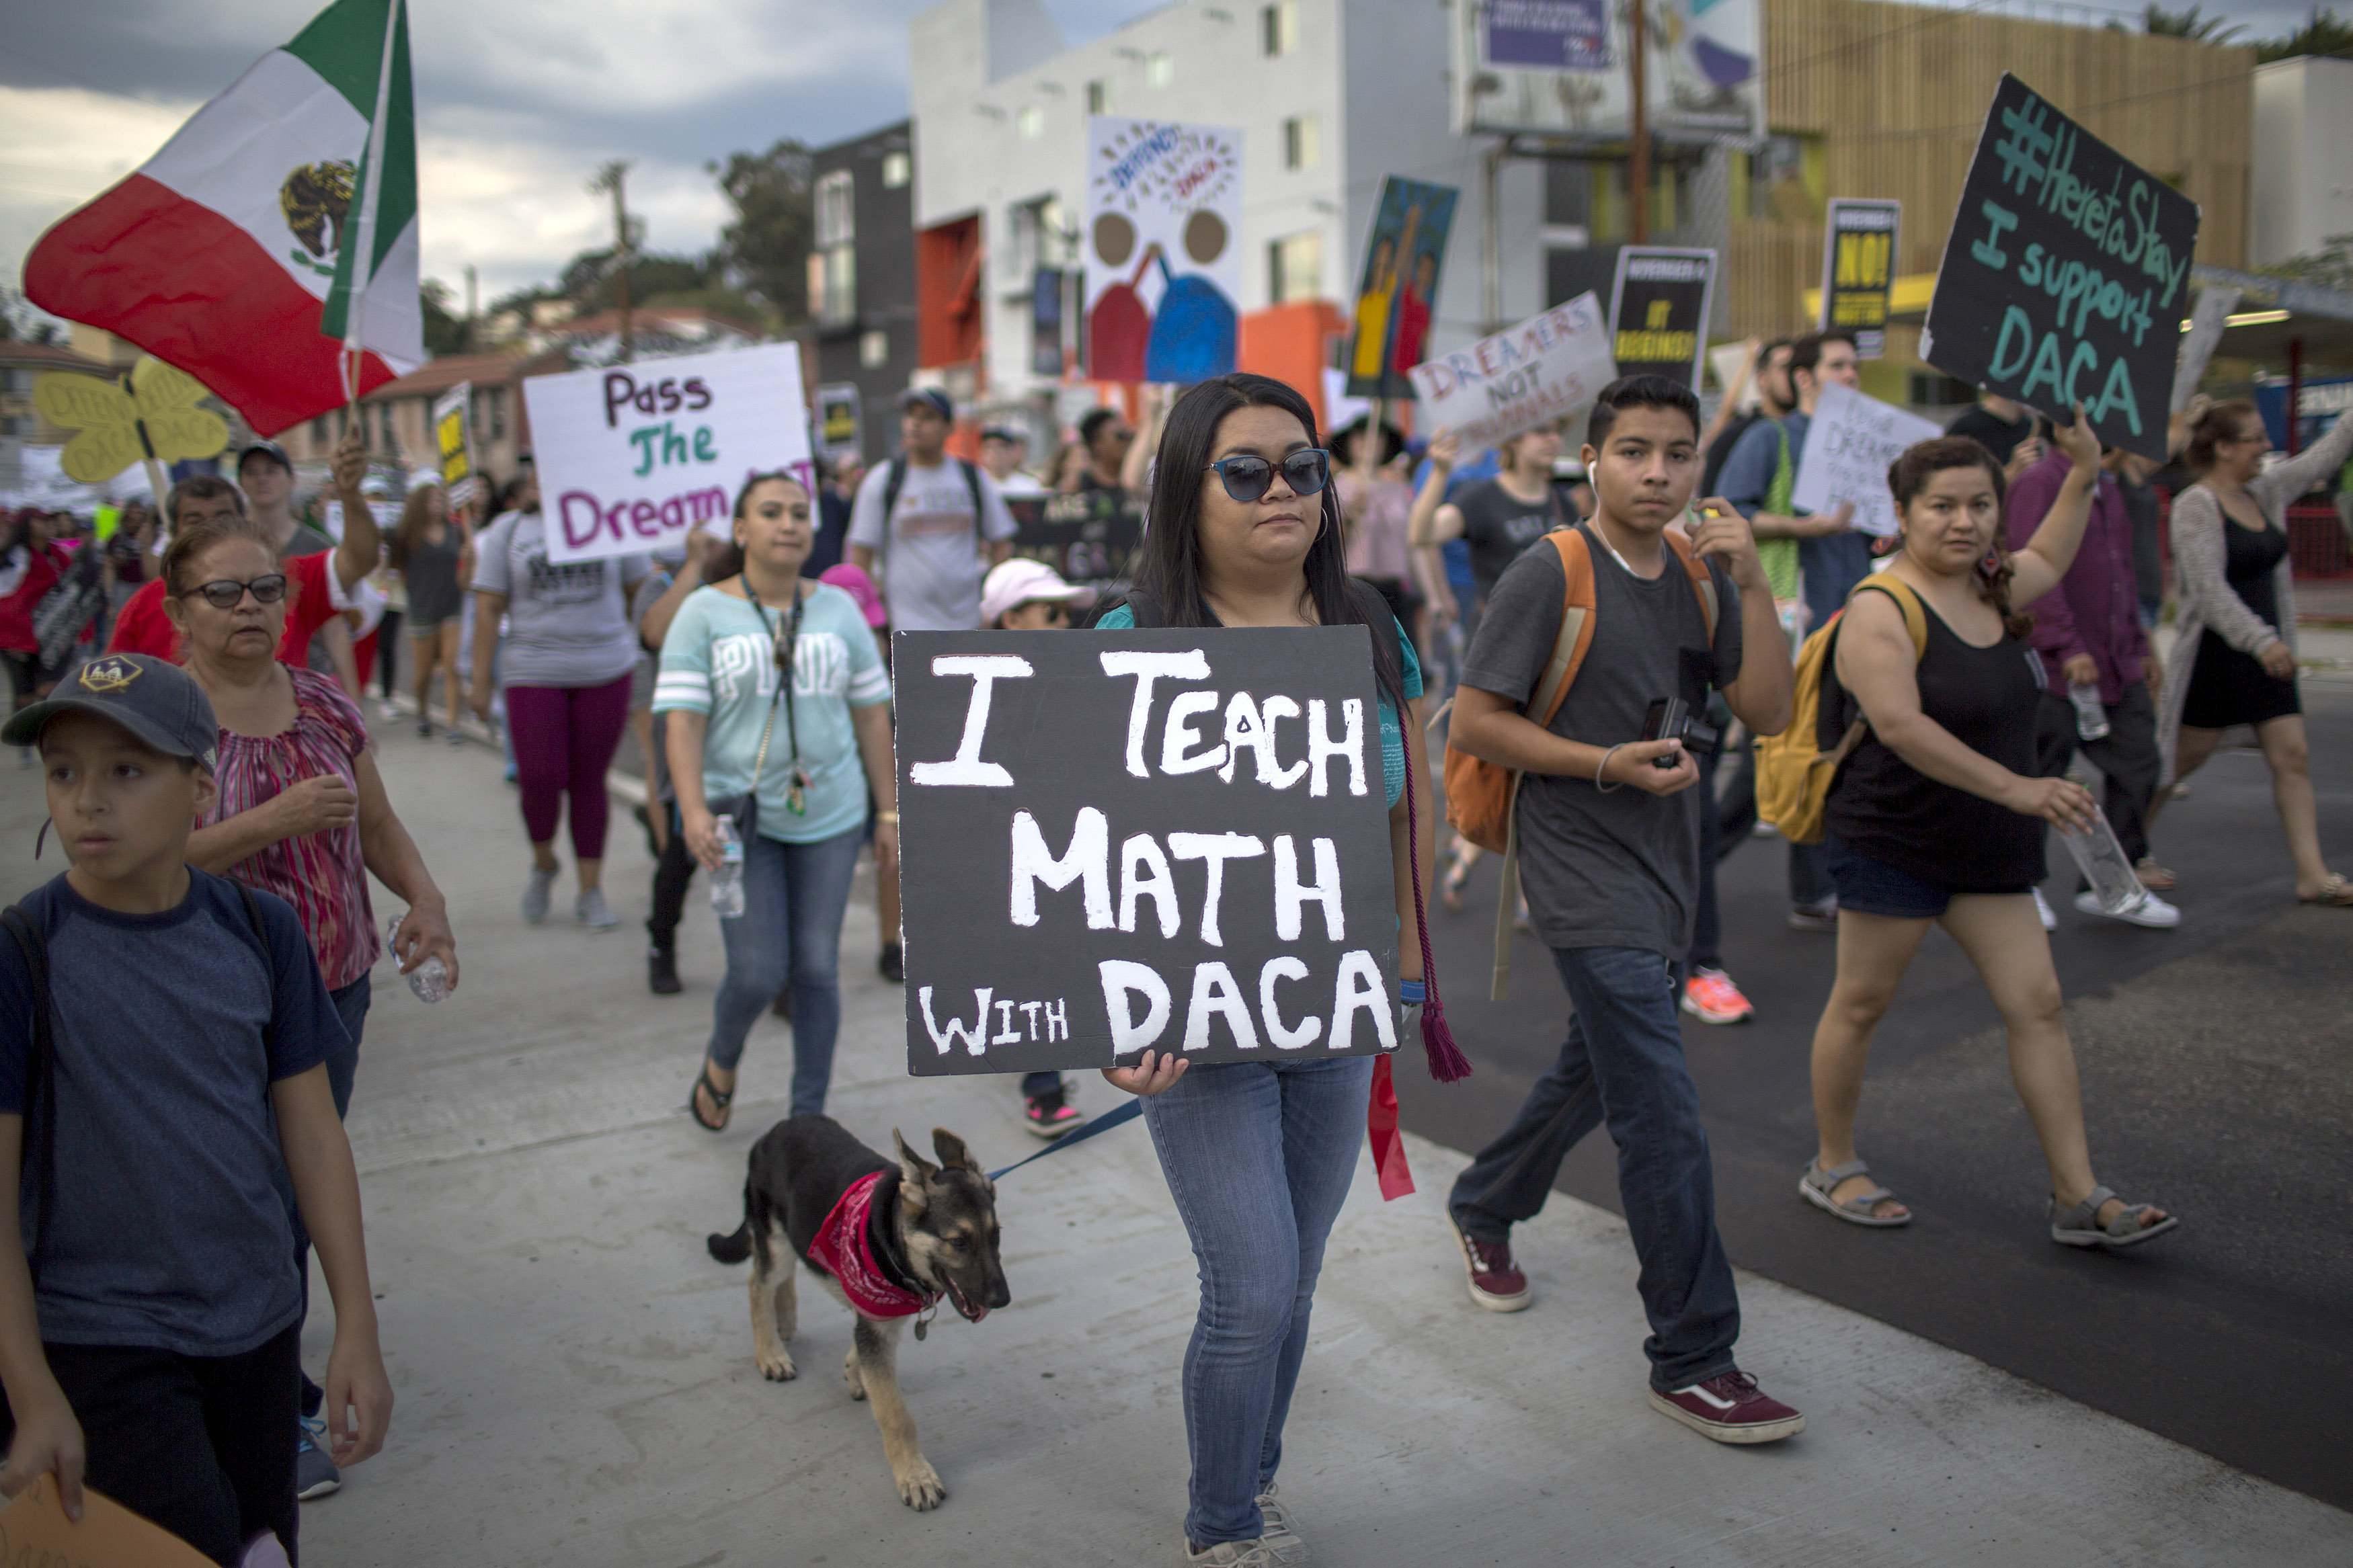 Proposals to Change Tuition and DACA Laws Could Threaten Education